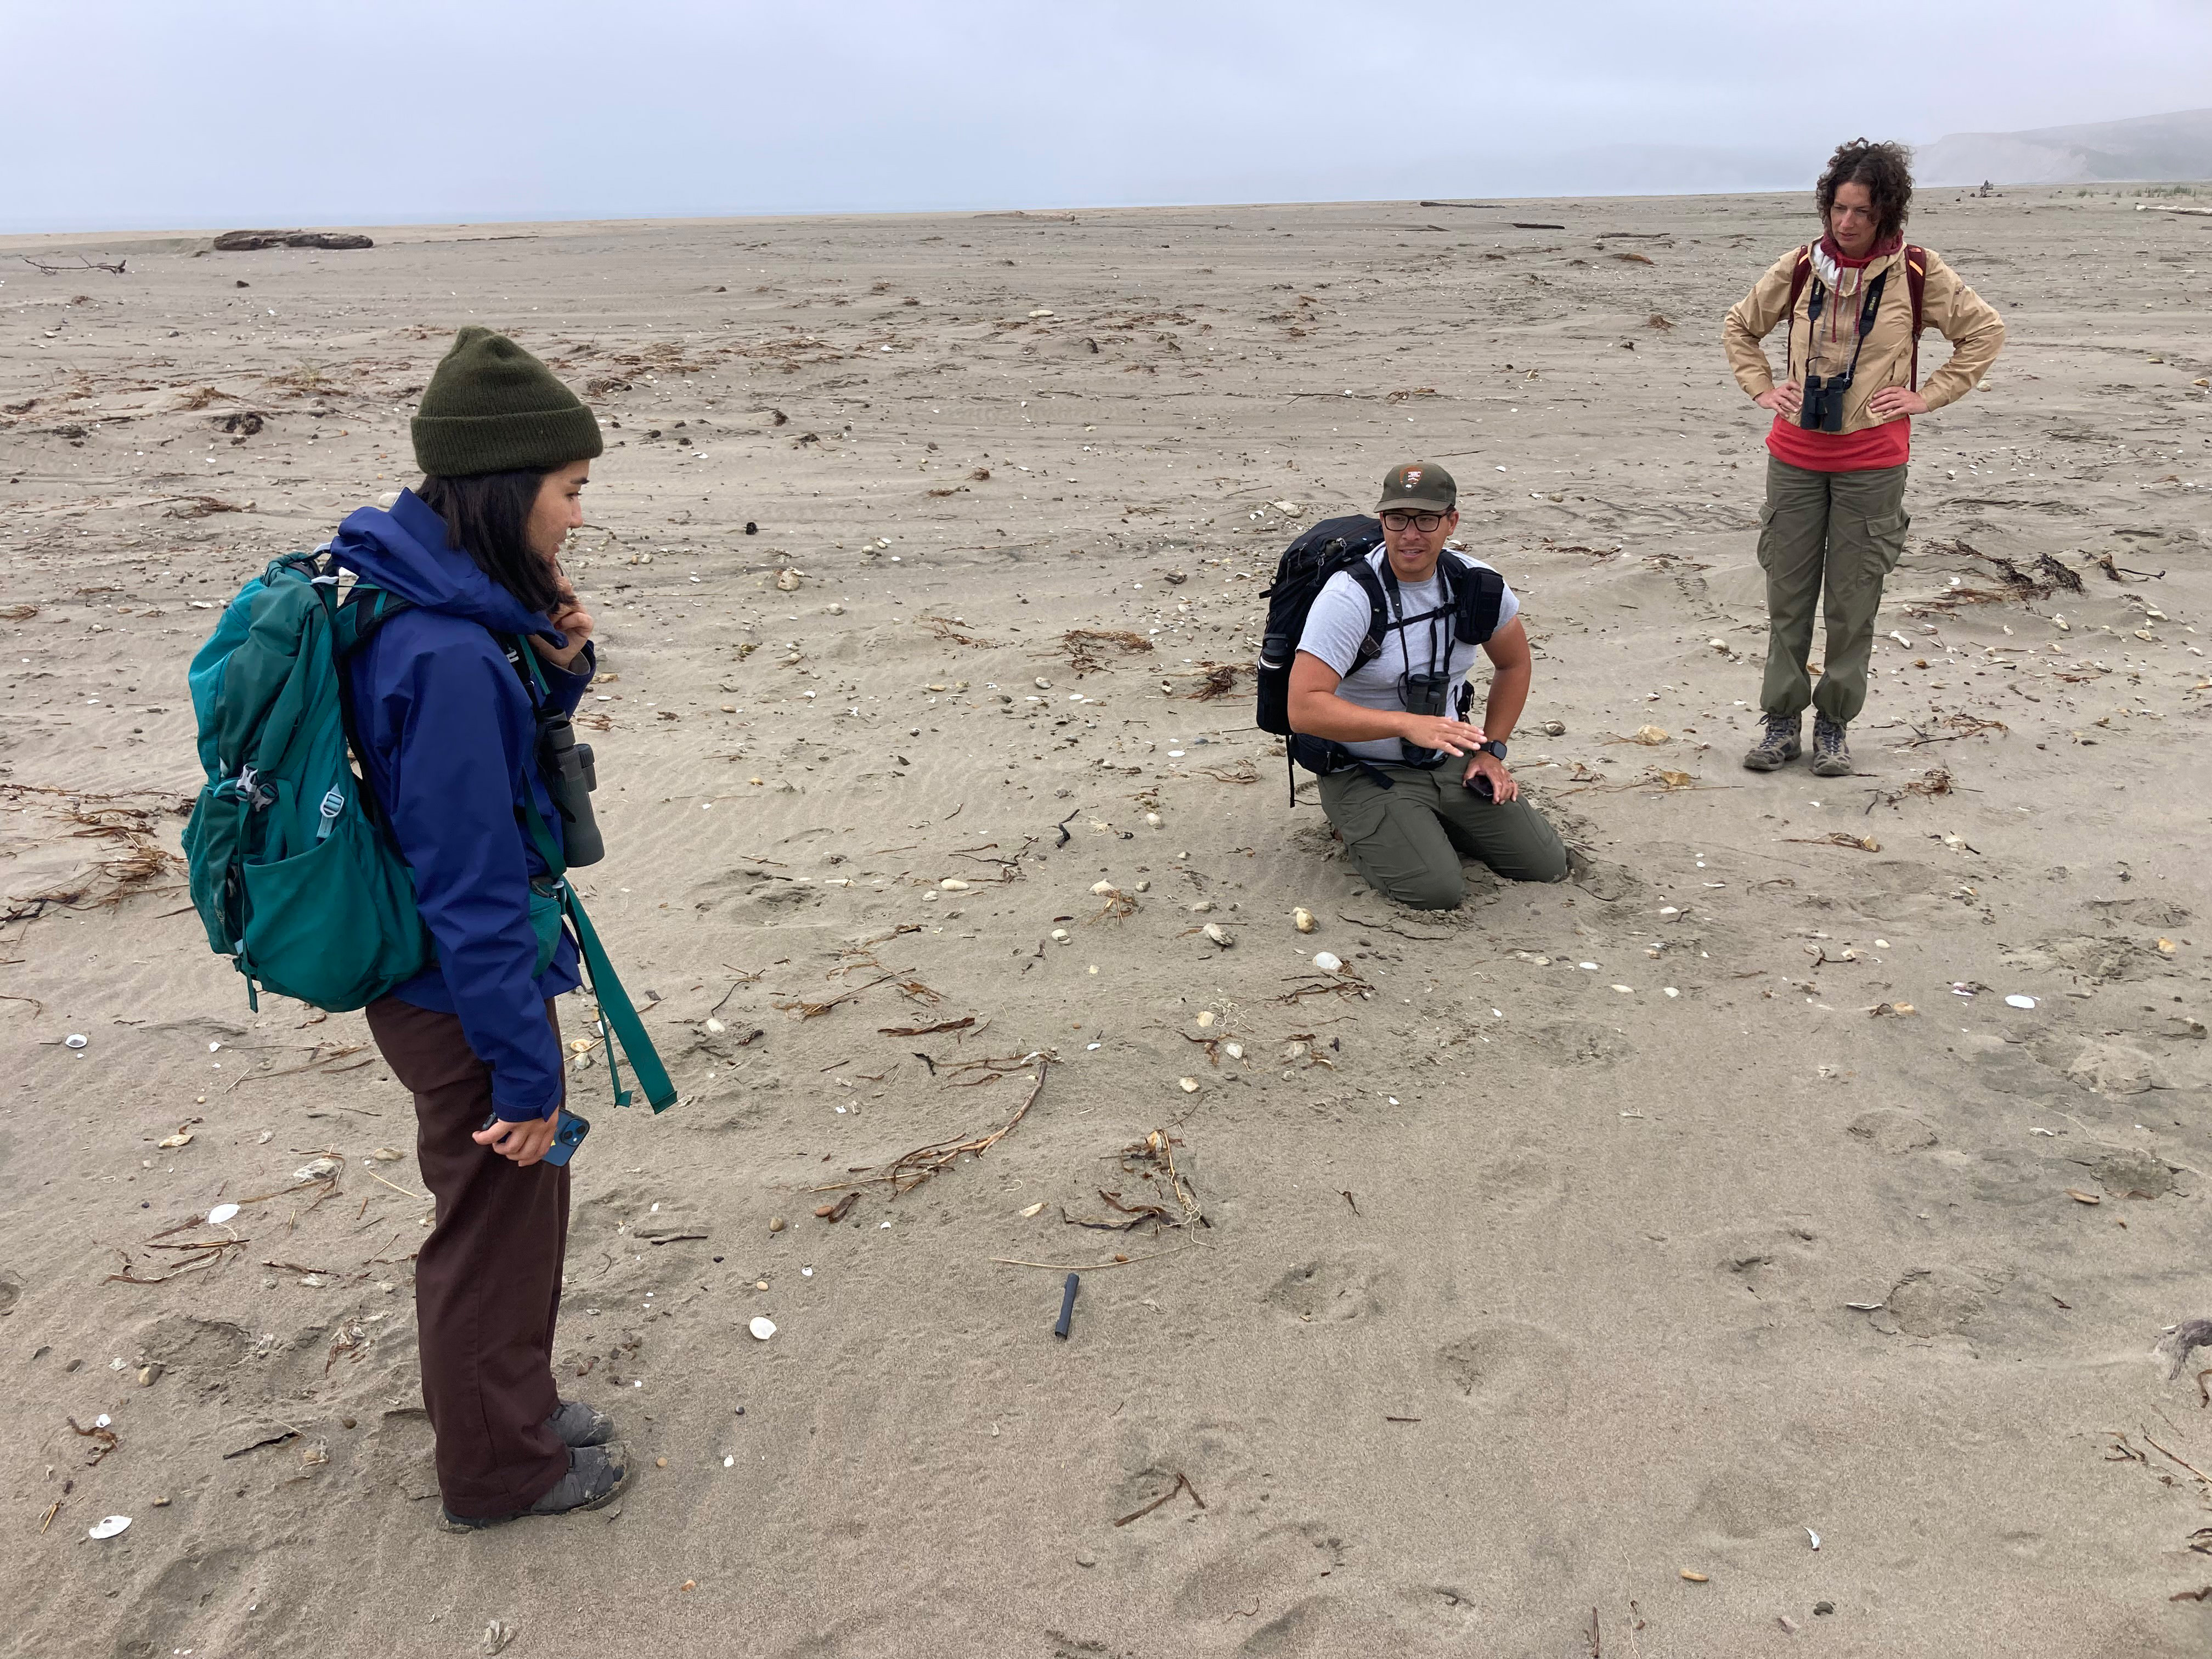 Two women and a man examining a snowy plover nest site on a sandy beach.